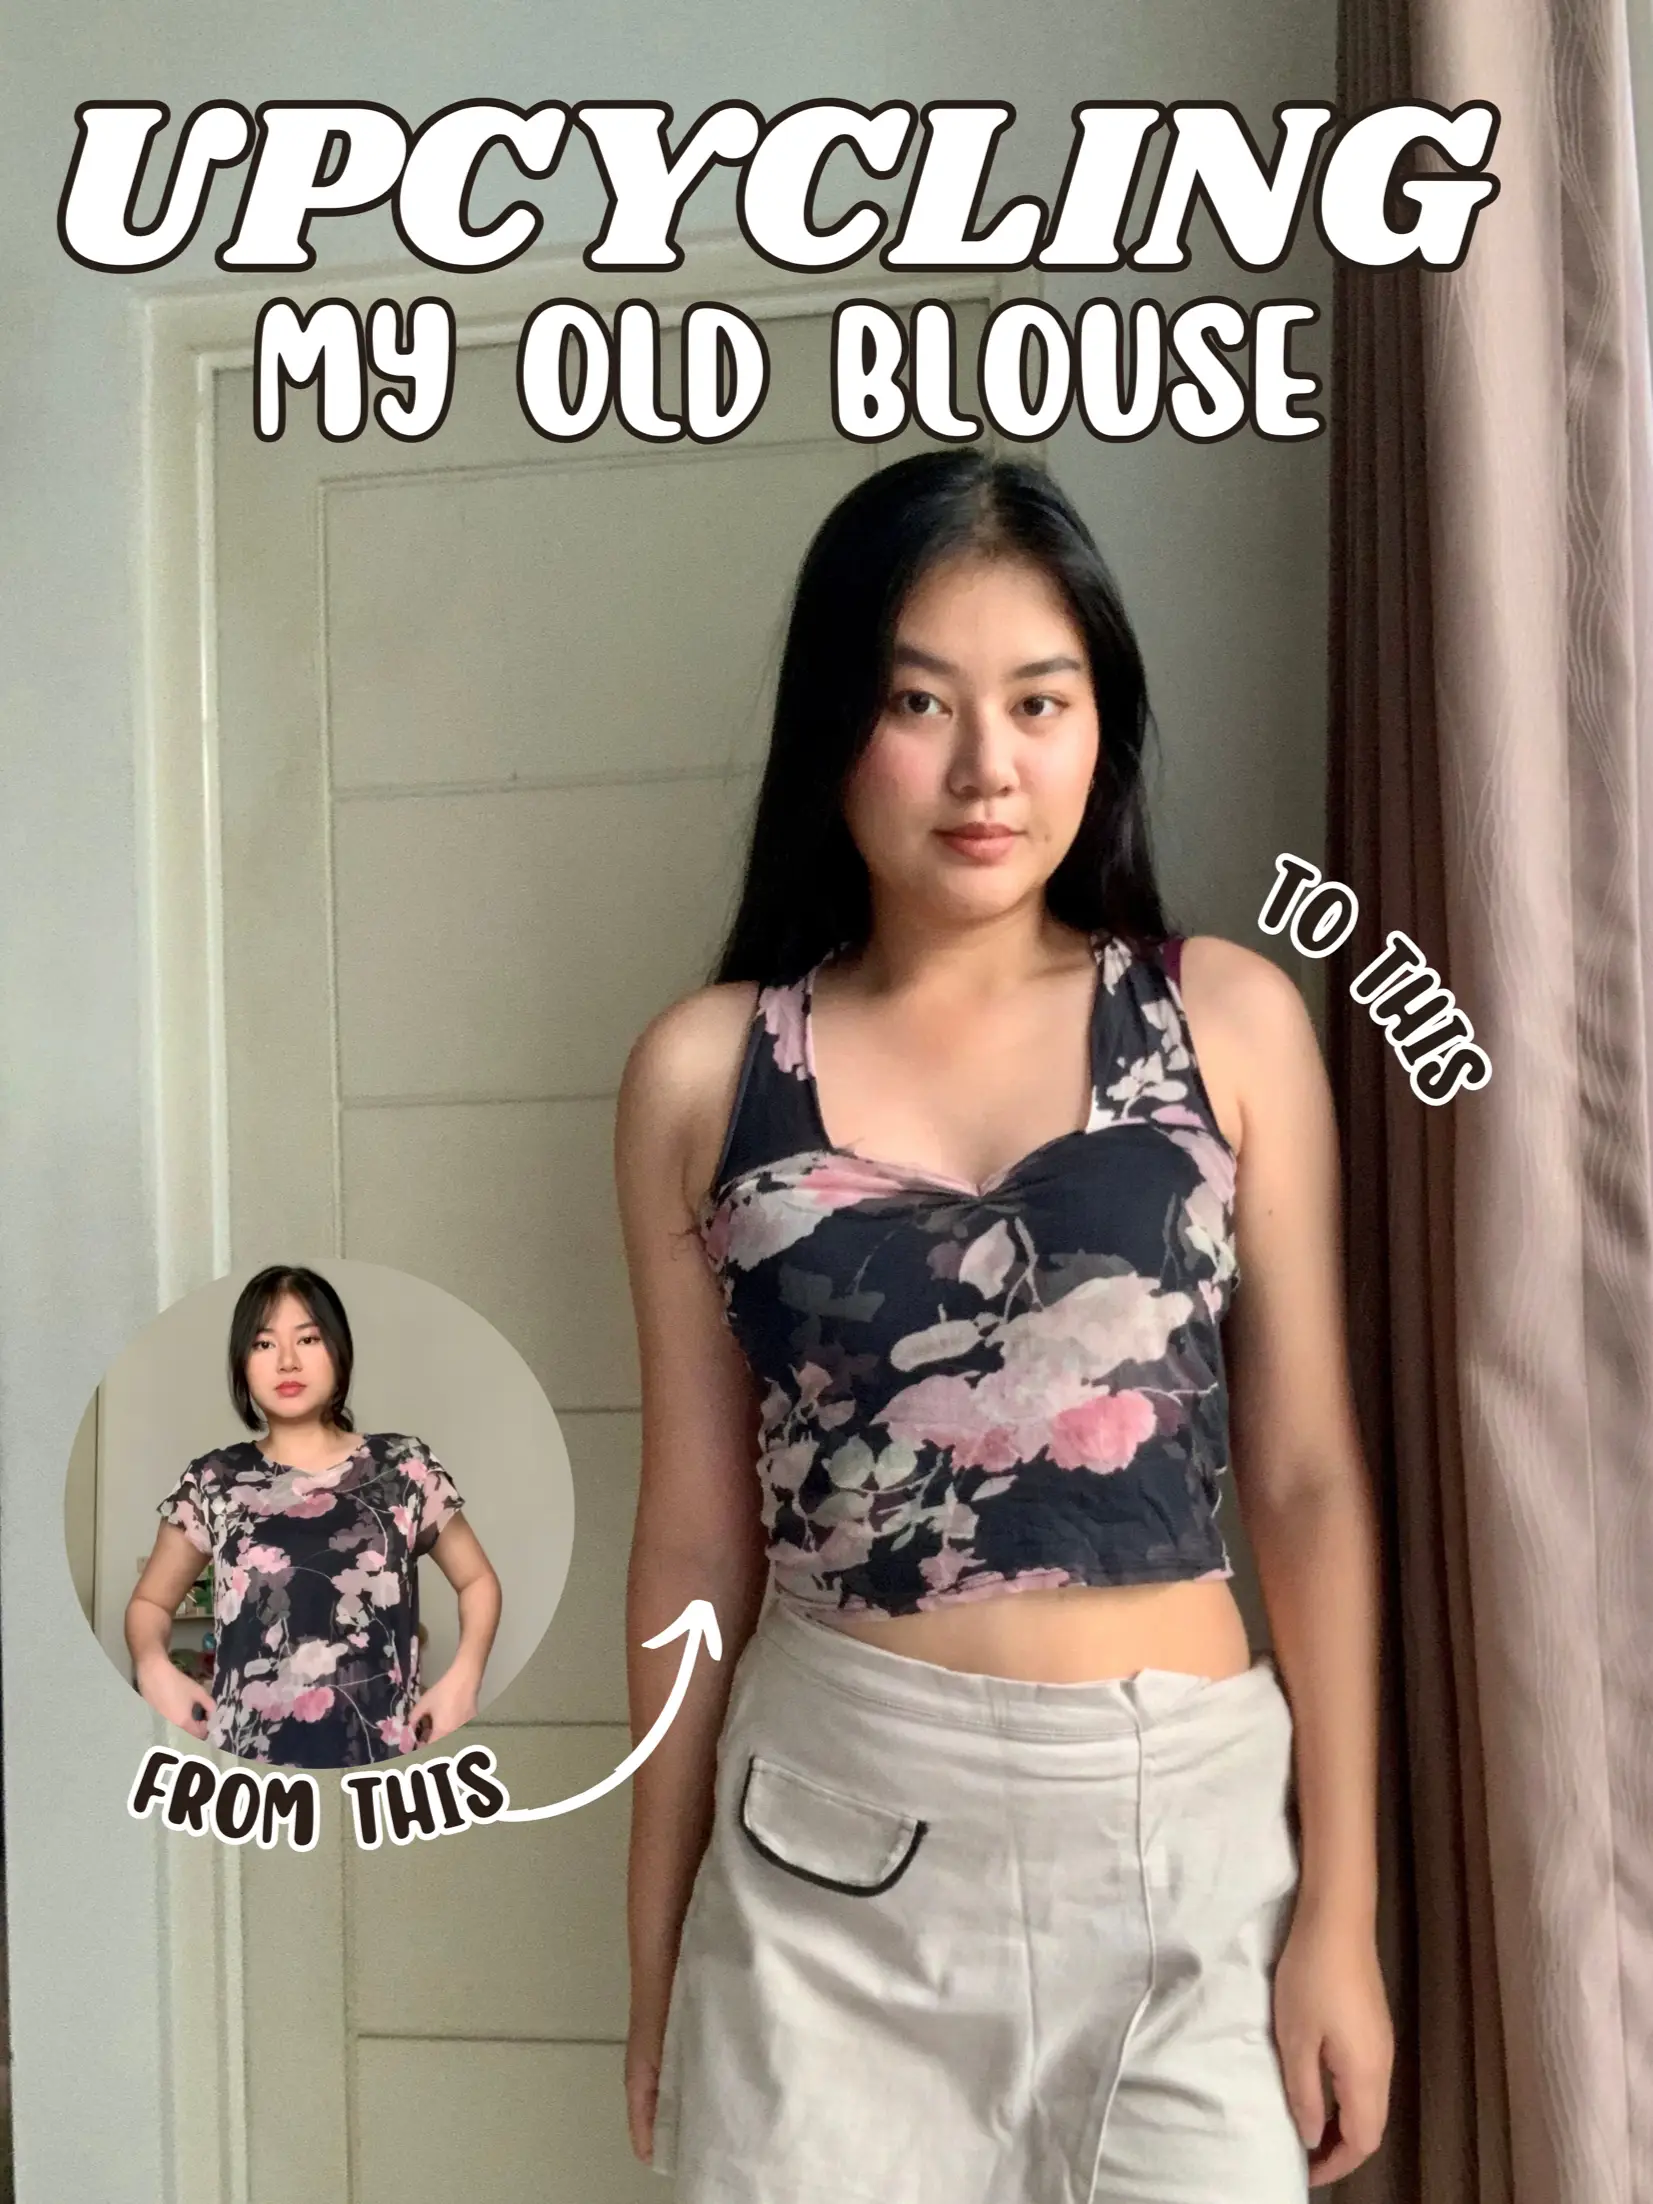 LET'S UPCYCLE THIS OLD BLOUSE WITH ME✨, Article posted by Nadien Halim